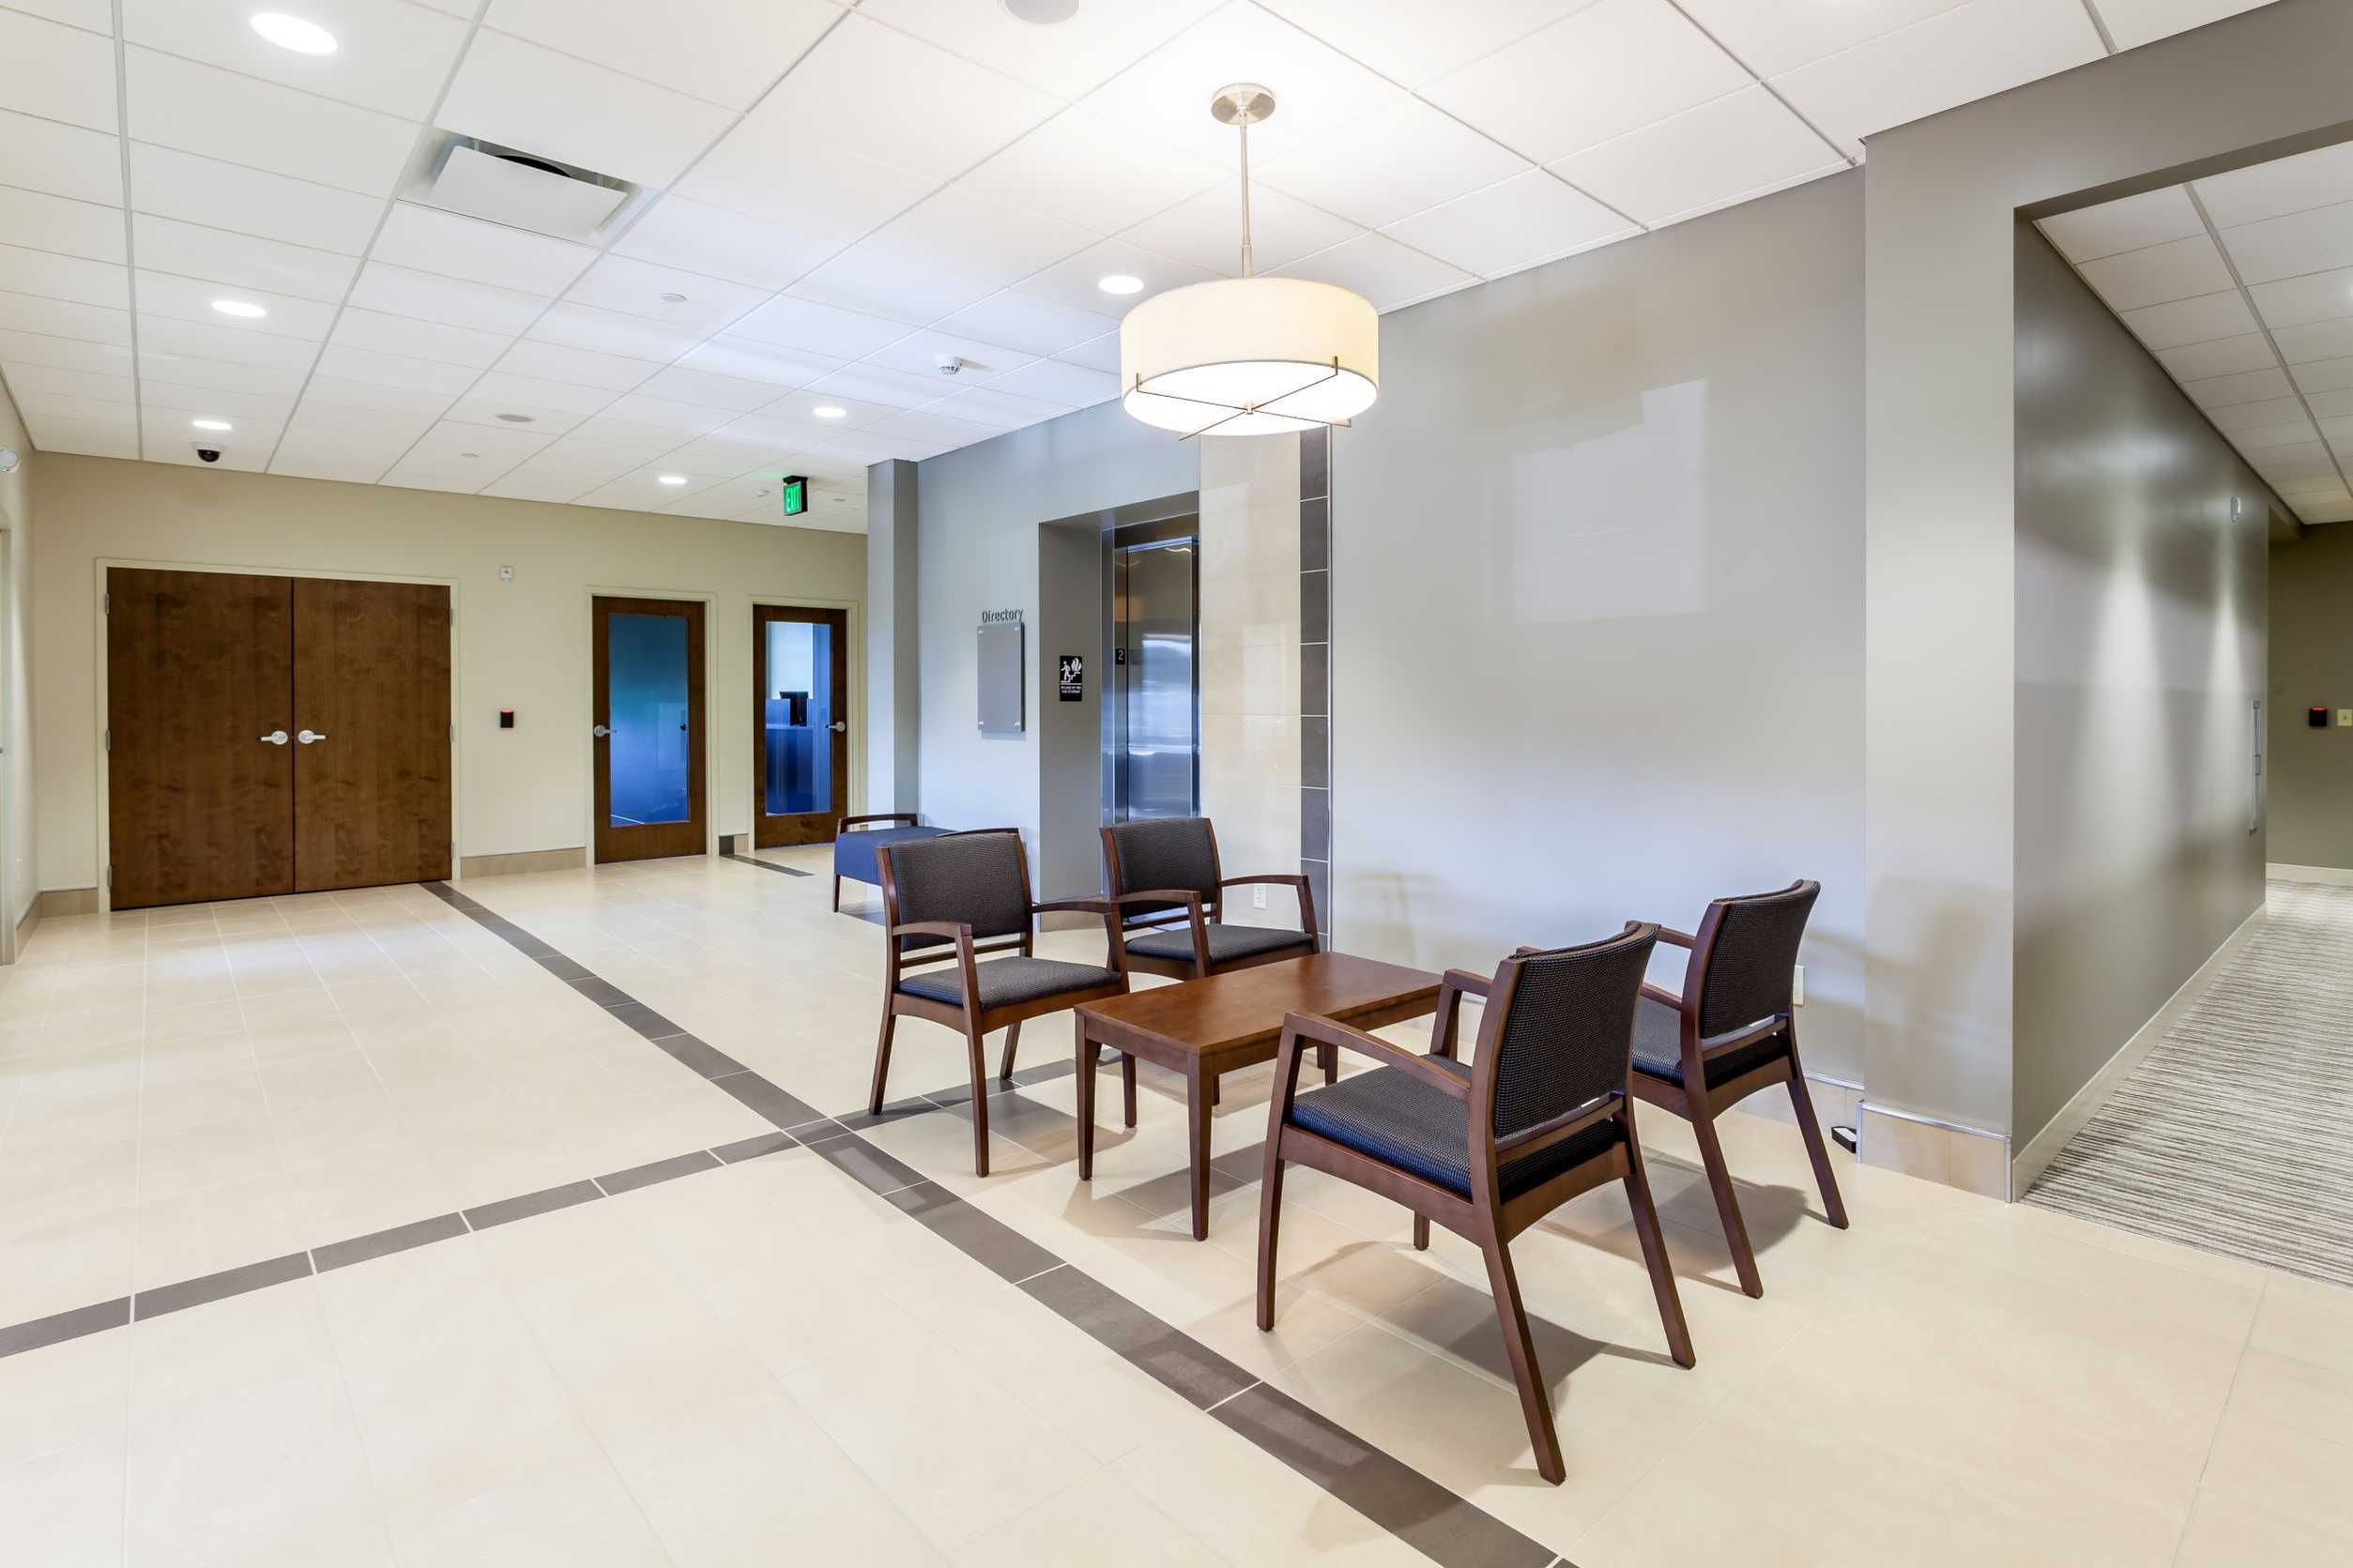 Waiting area for credit union members